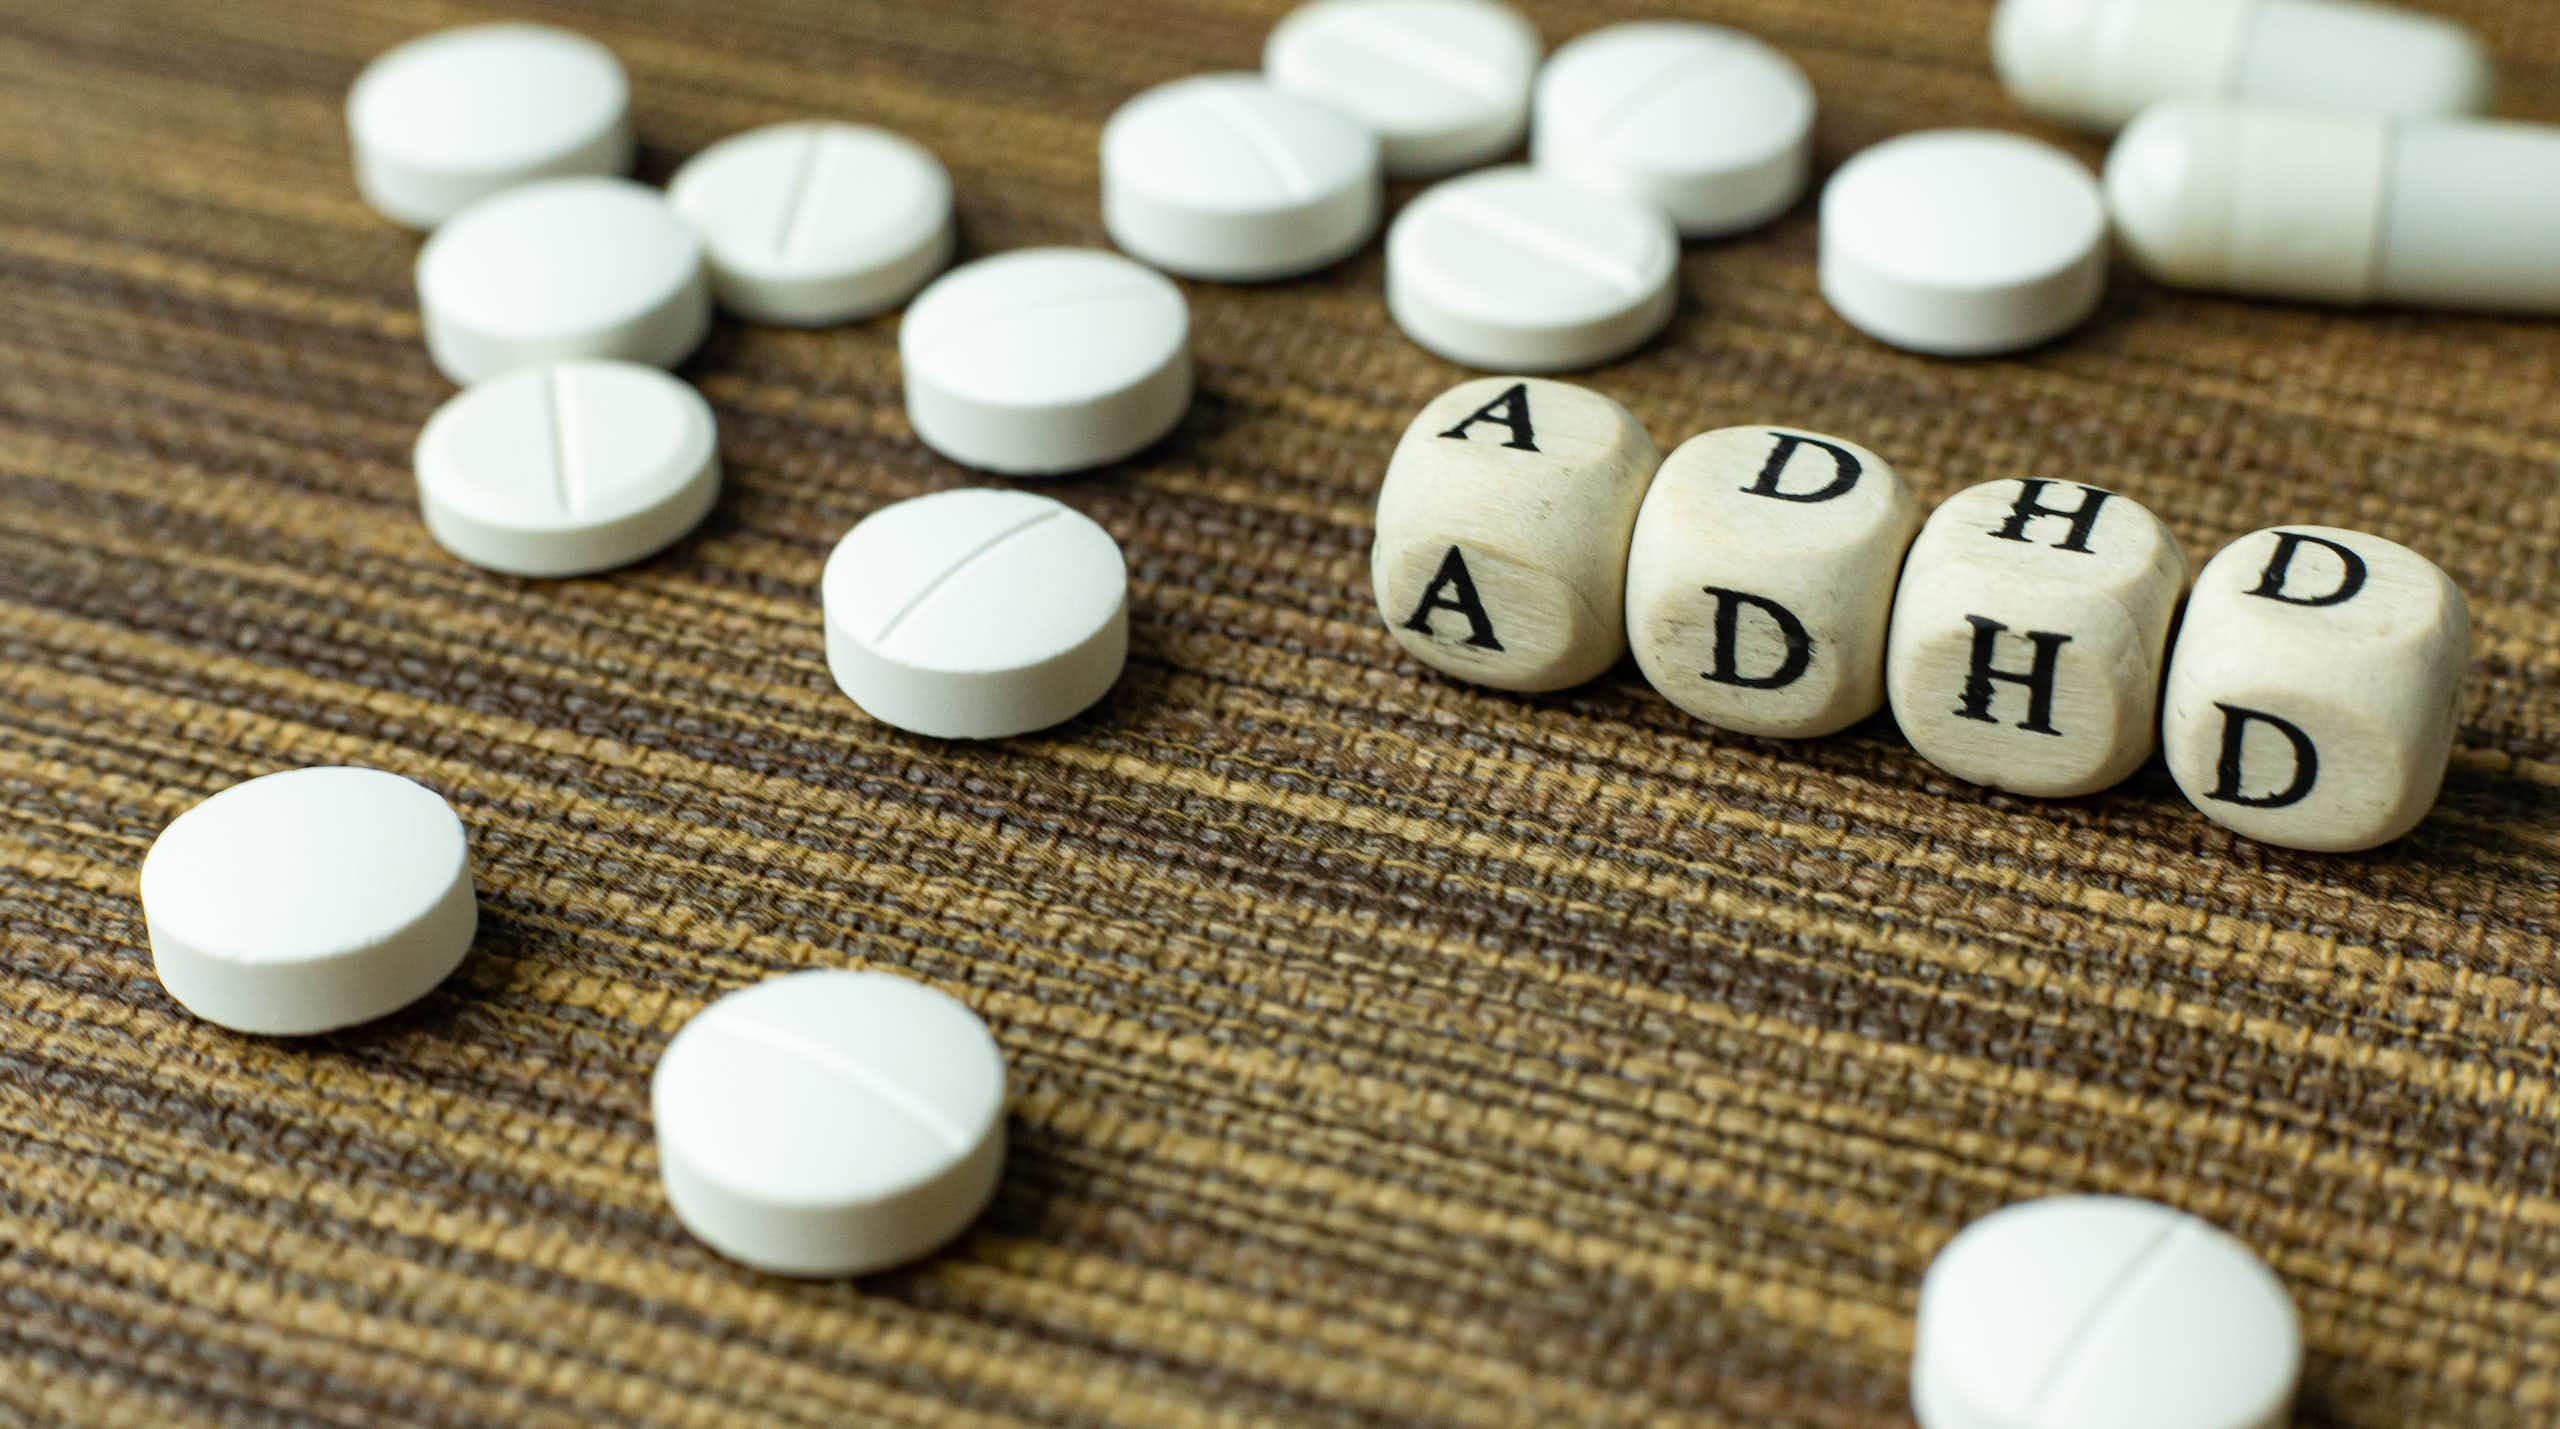 ADHD letters surrounded by pills